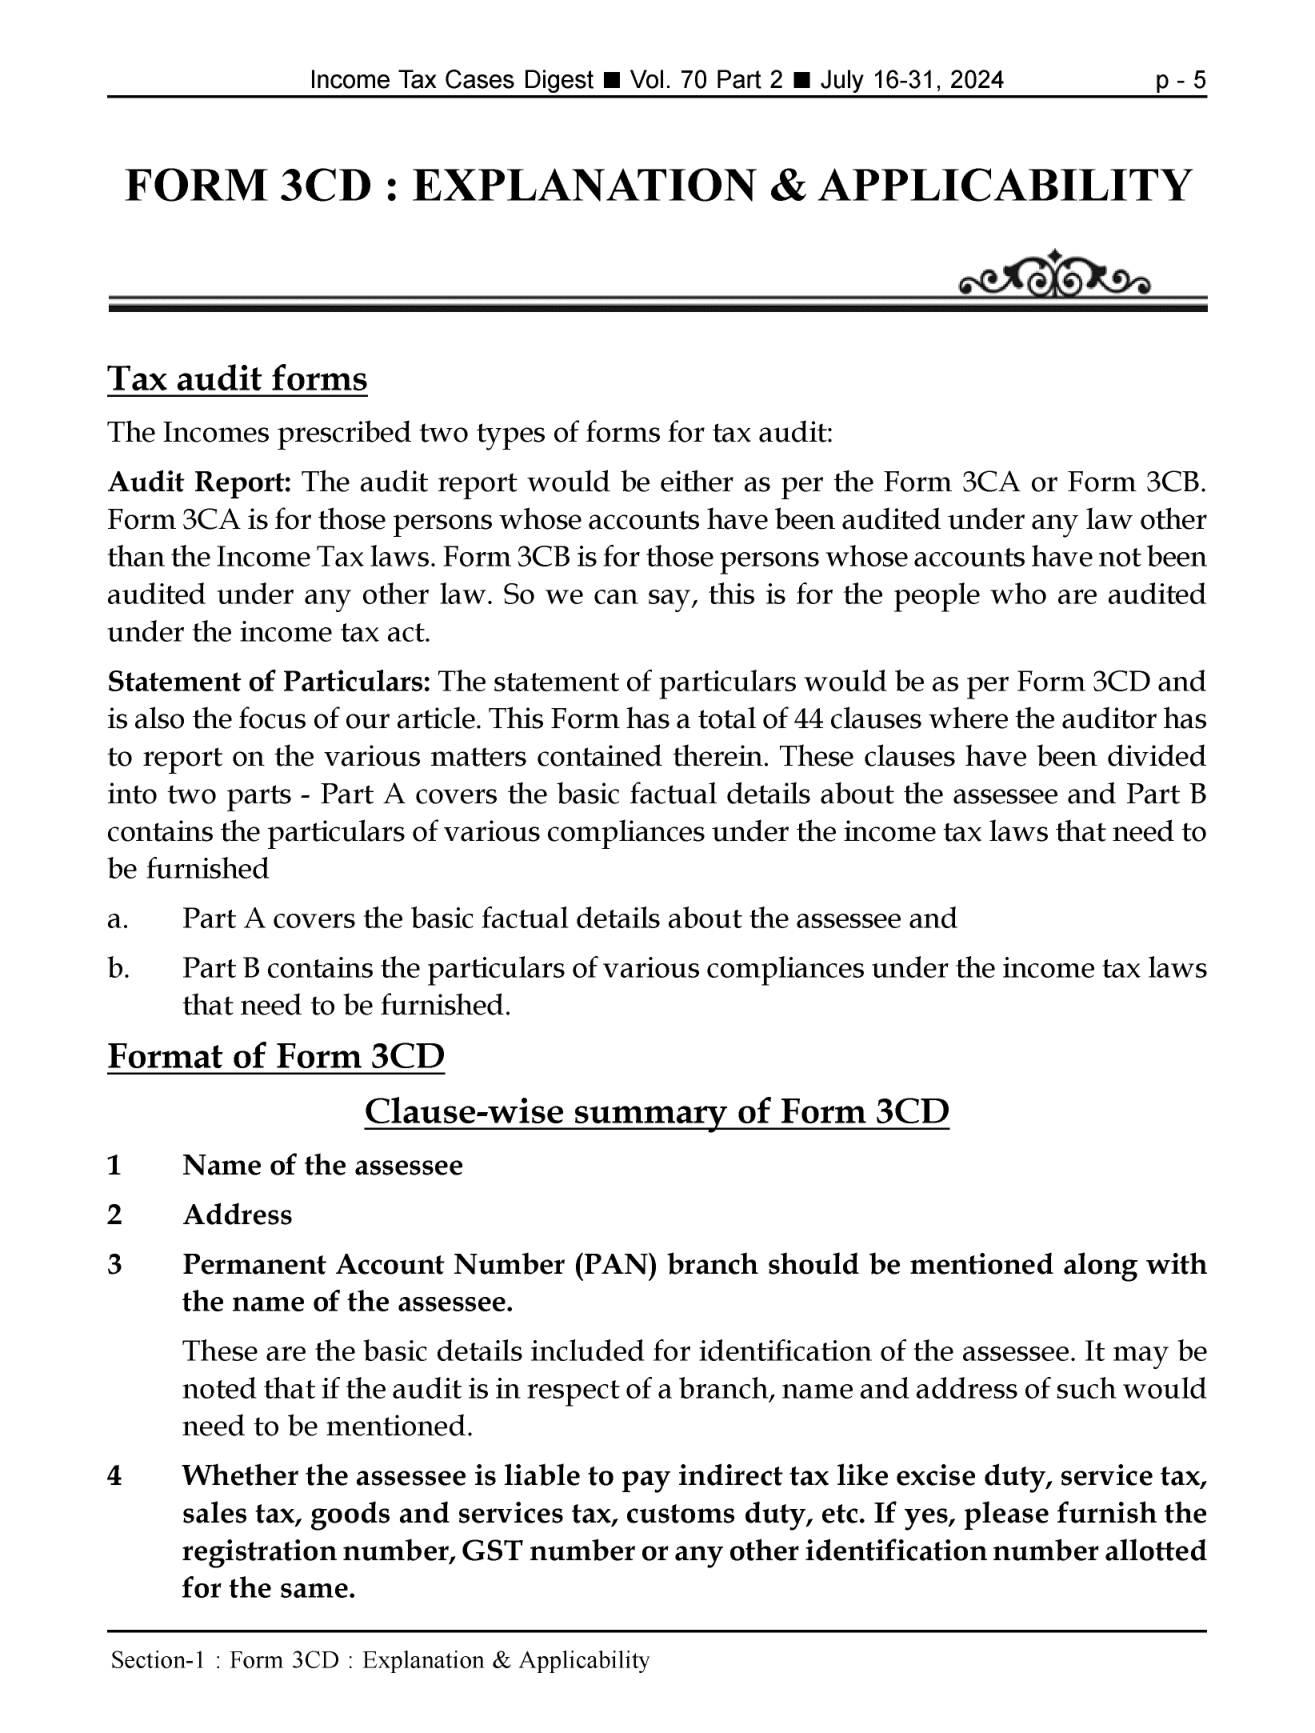 Income-Tax Cases Digest Magazine Page 3